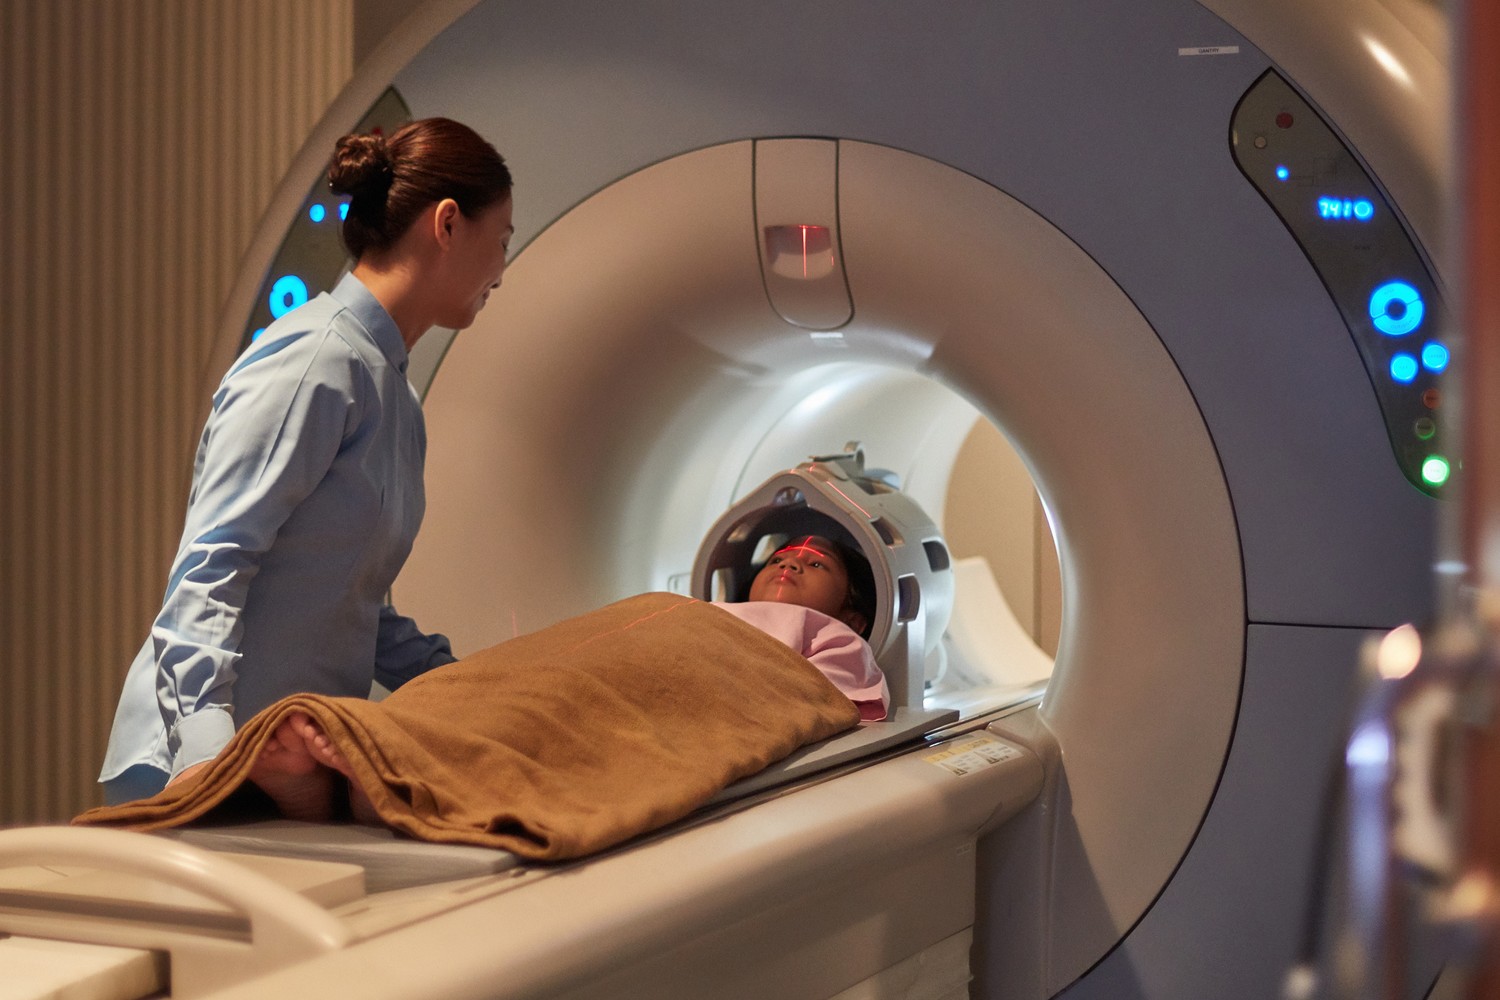 Magnet technology in MRI scanners leads to better care at lower cost – UKRI